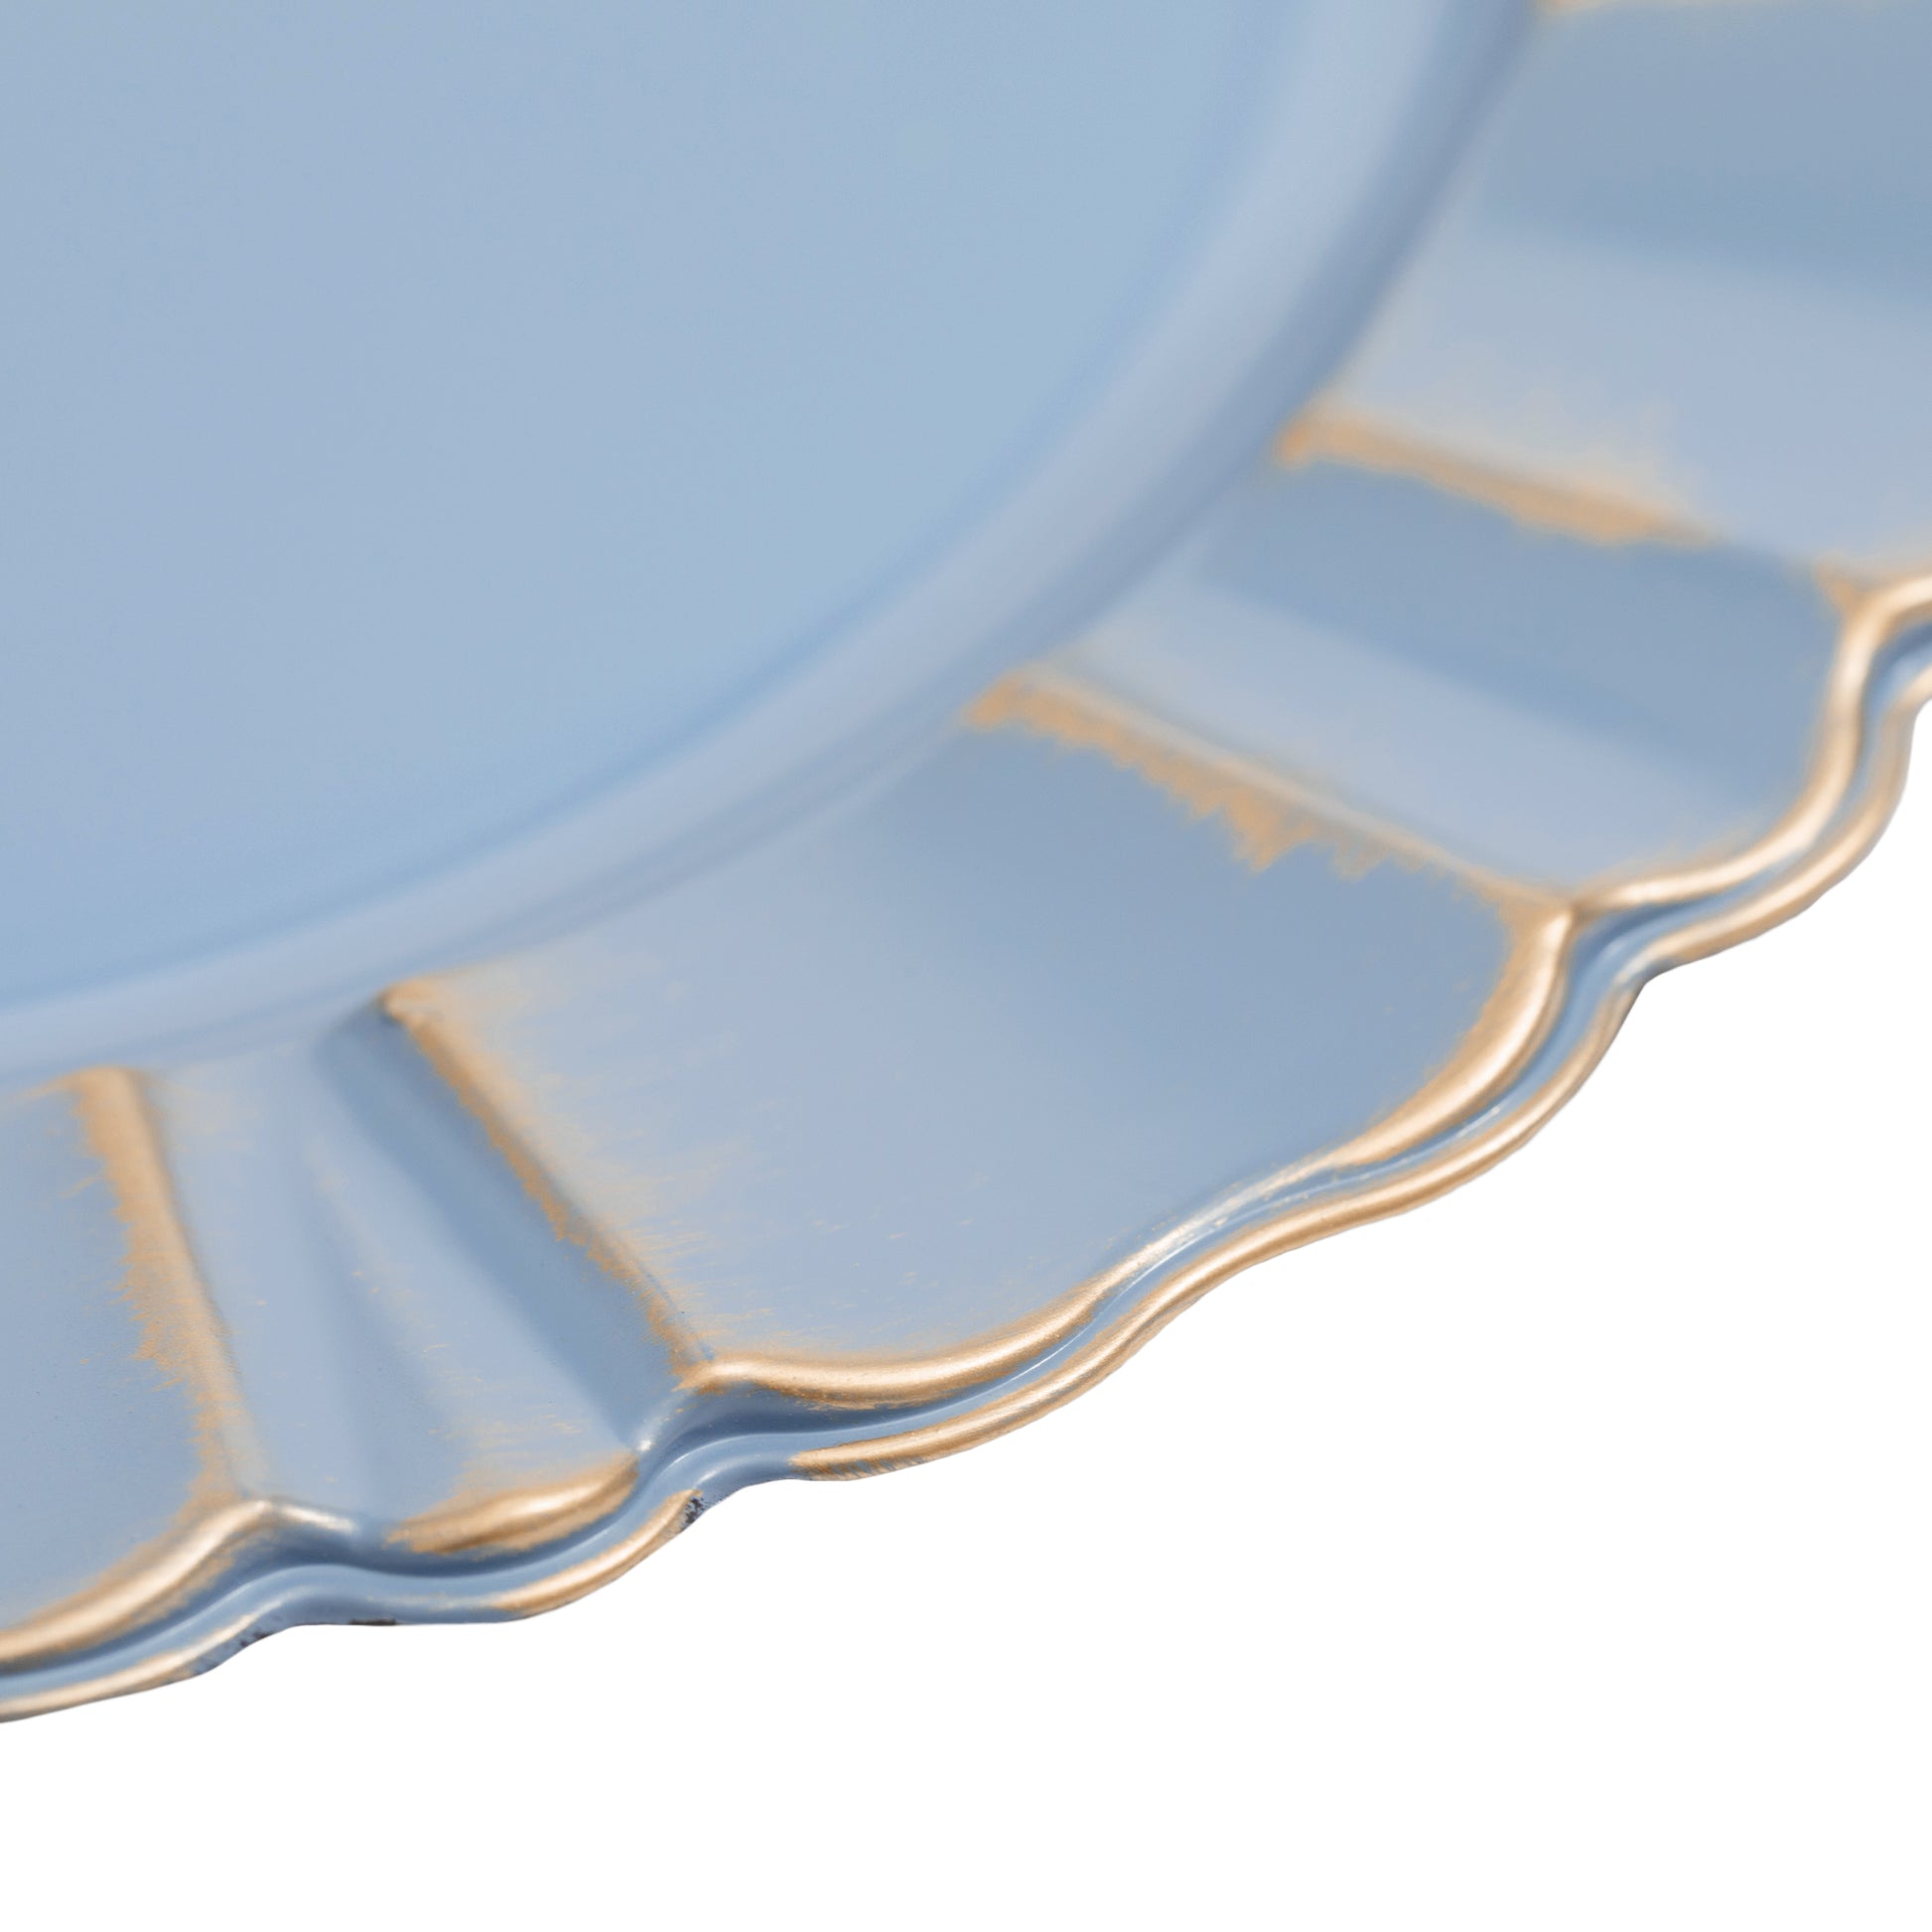 Waved Scalloped Acrylic 13" Charger Plate - Dusty Blue & Gold - CV Linens